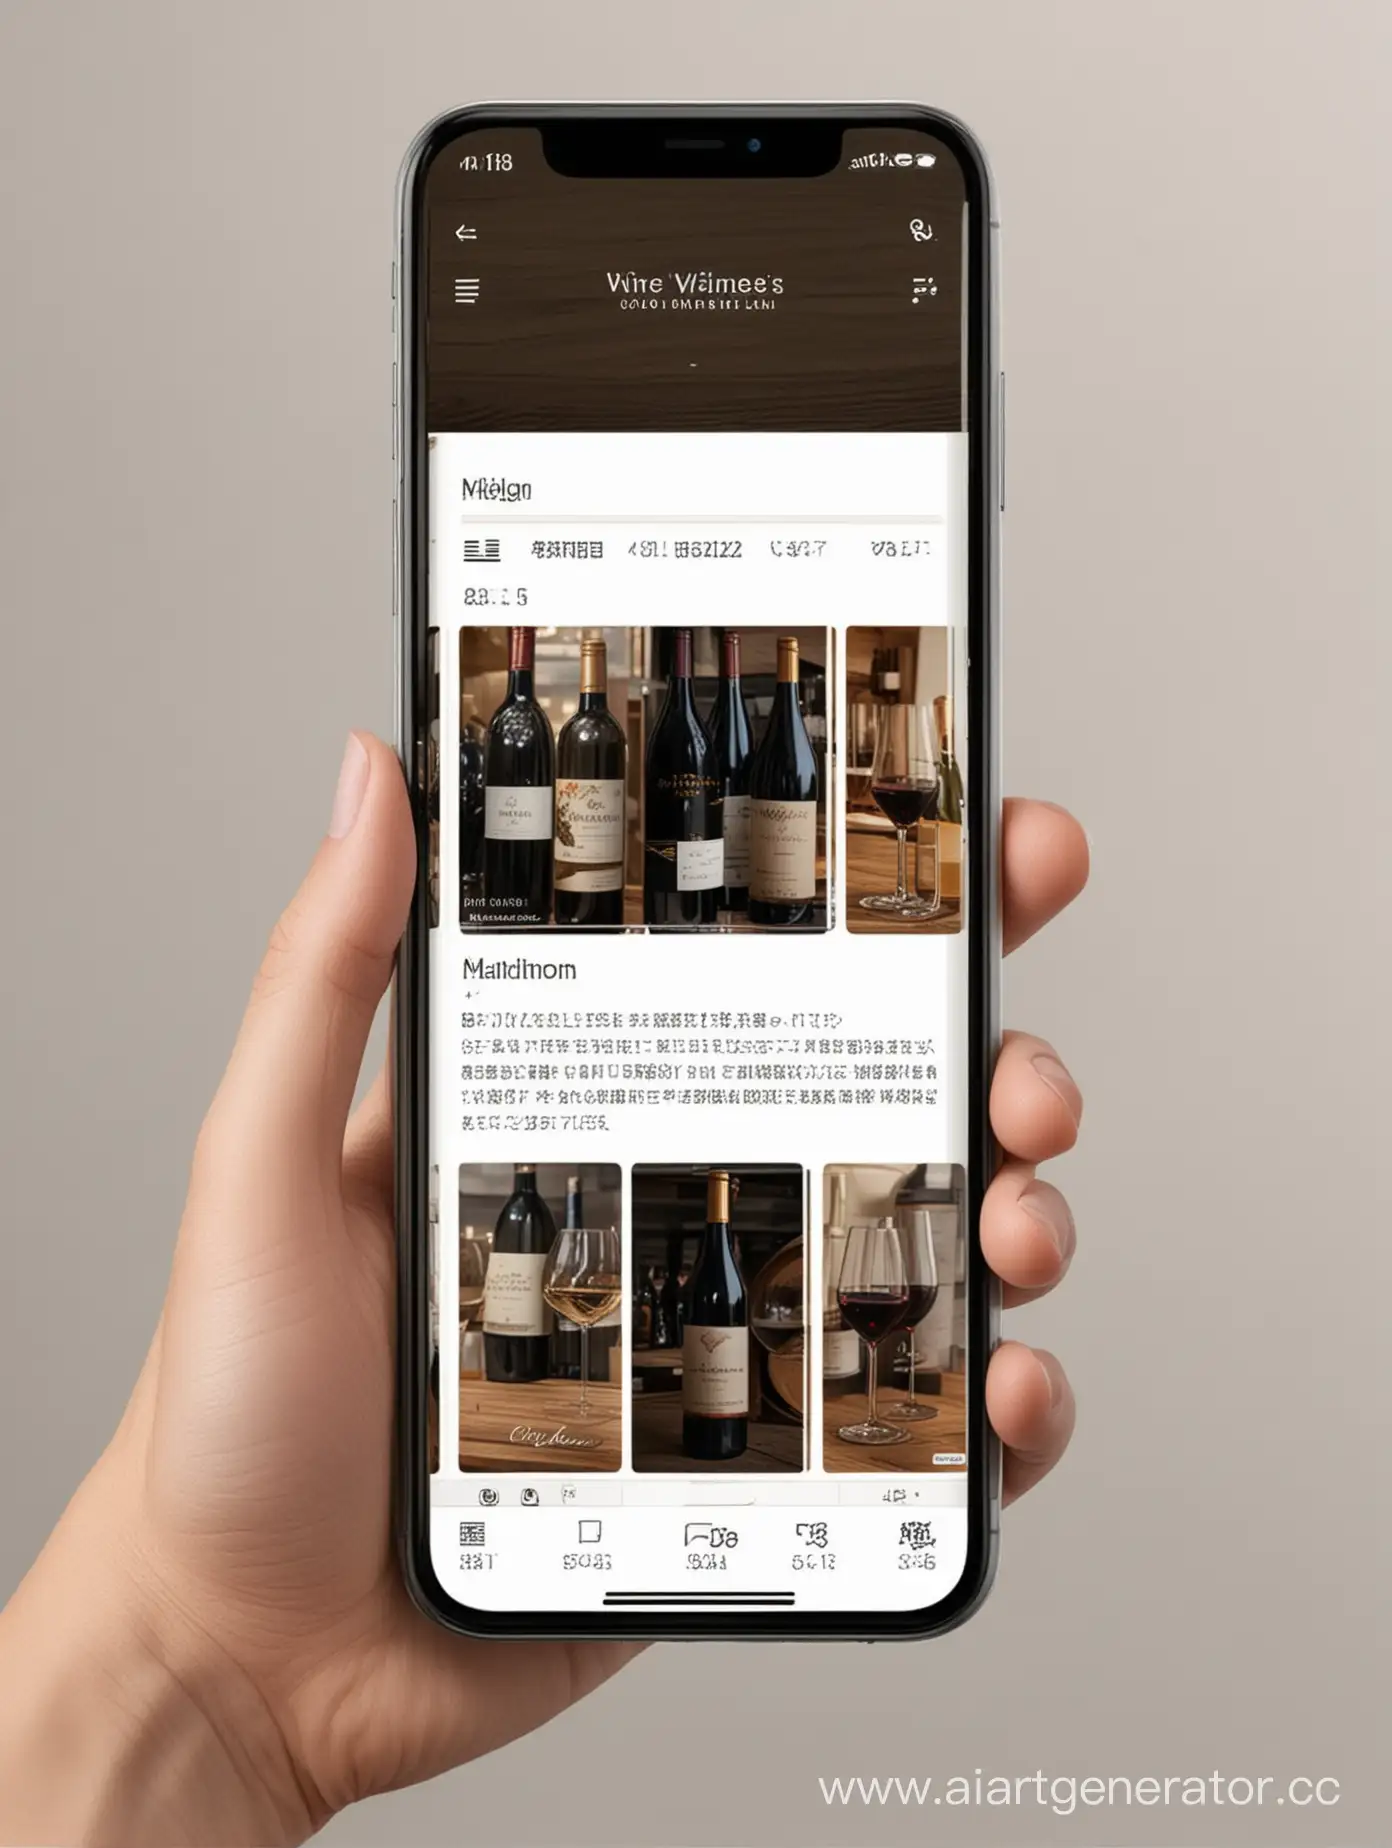 Mobile-App-Interface-Displaying-Wine-Catalog-and-Detailed-Card